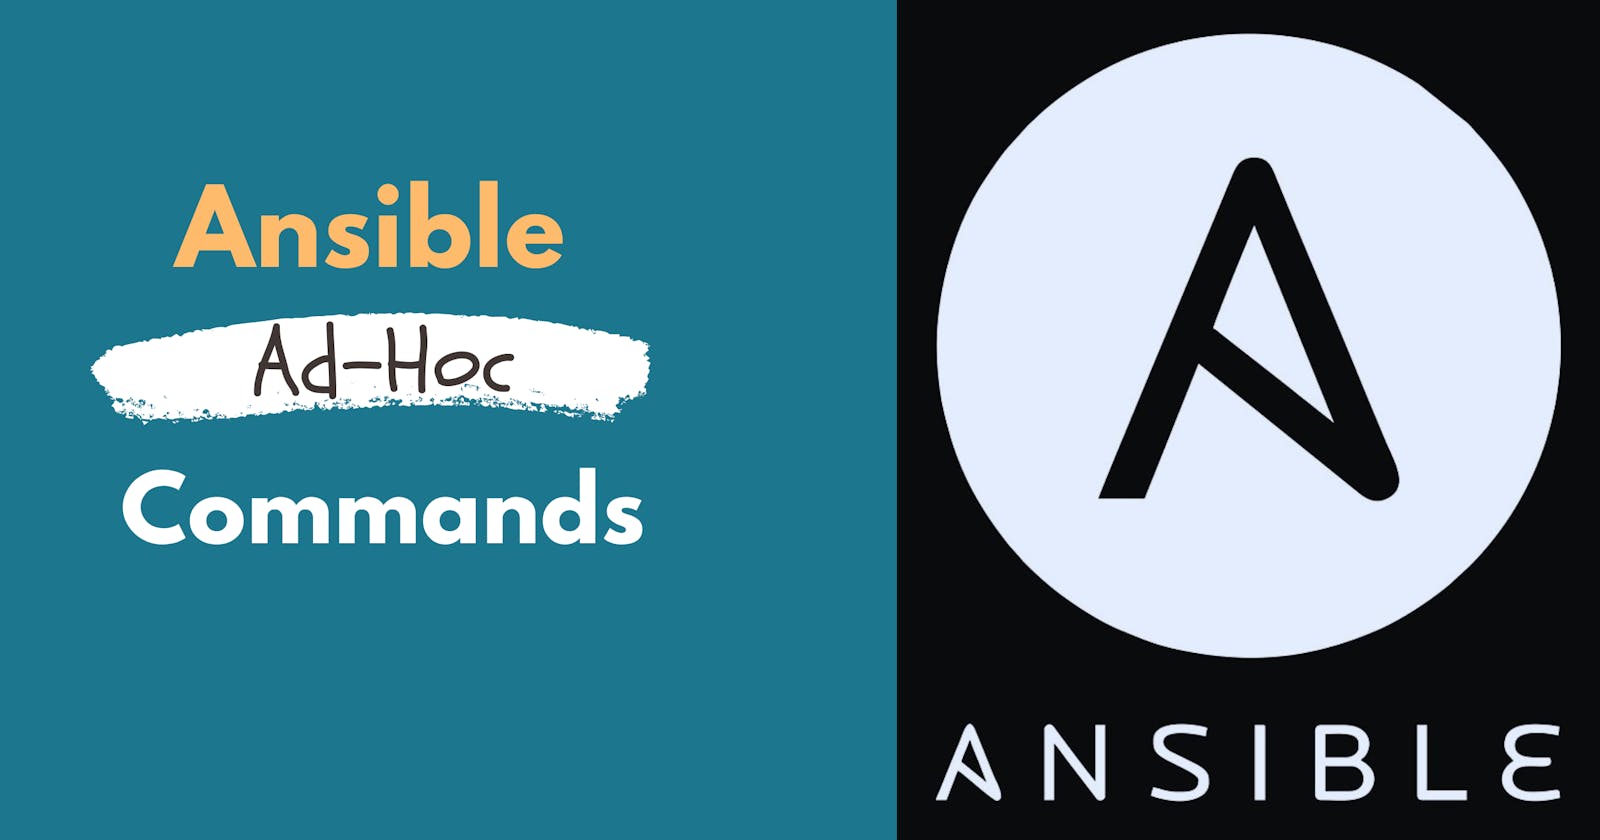 Ansible Ad-Hoc Commands